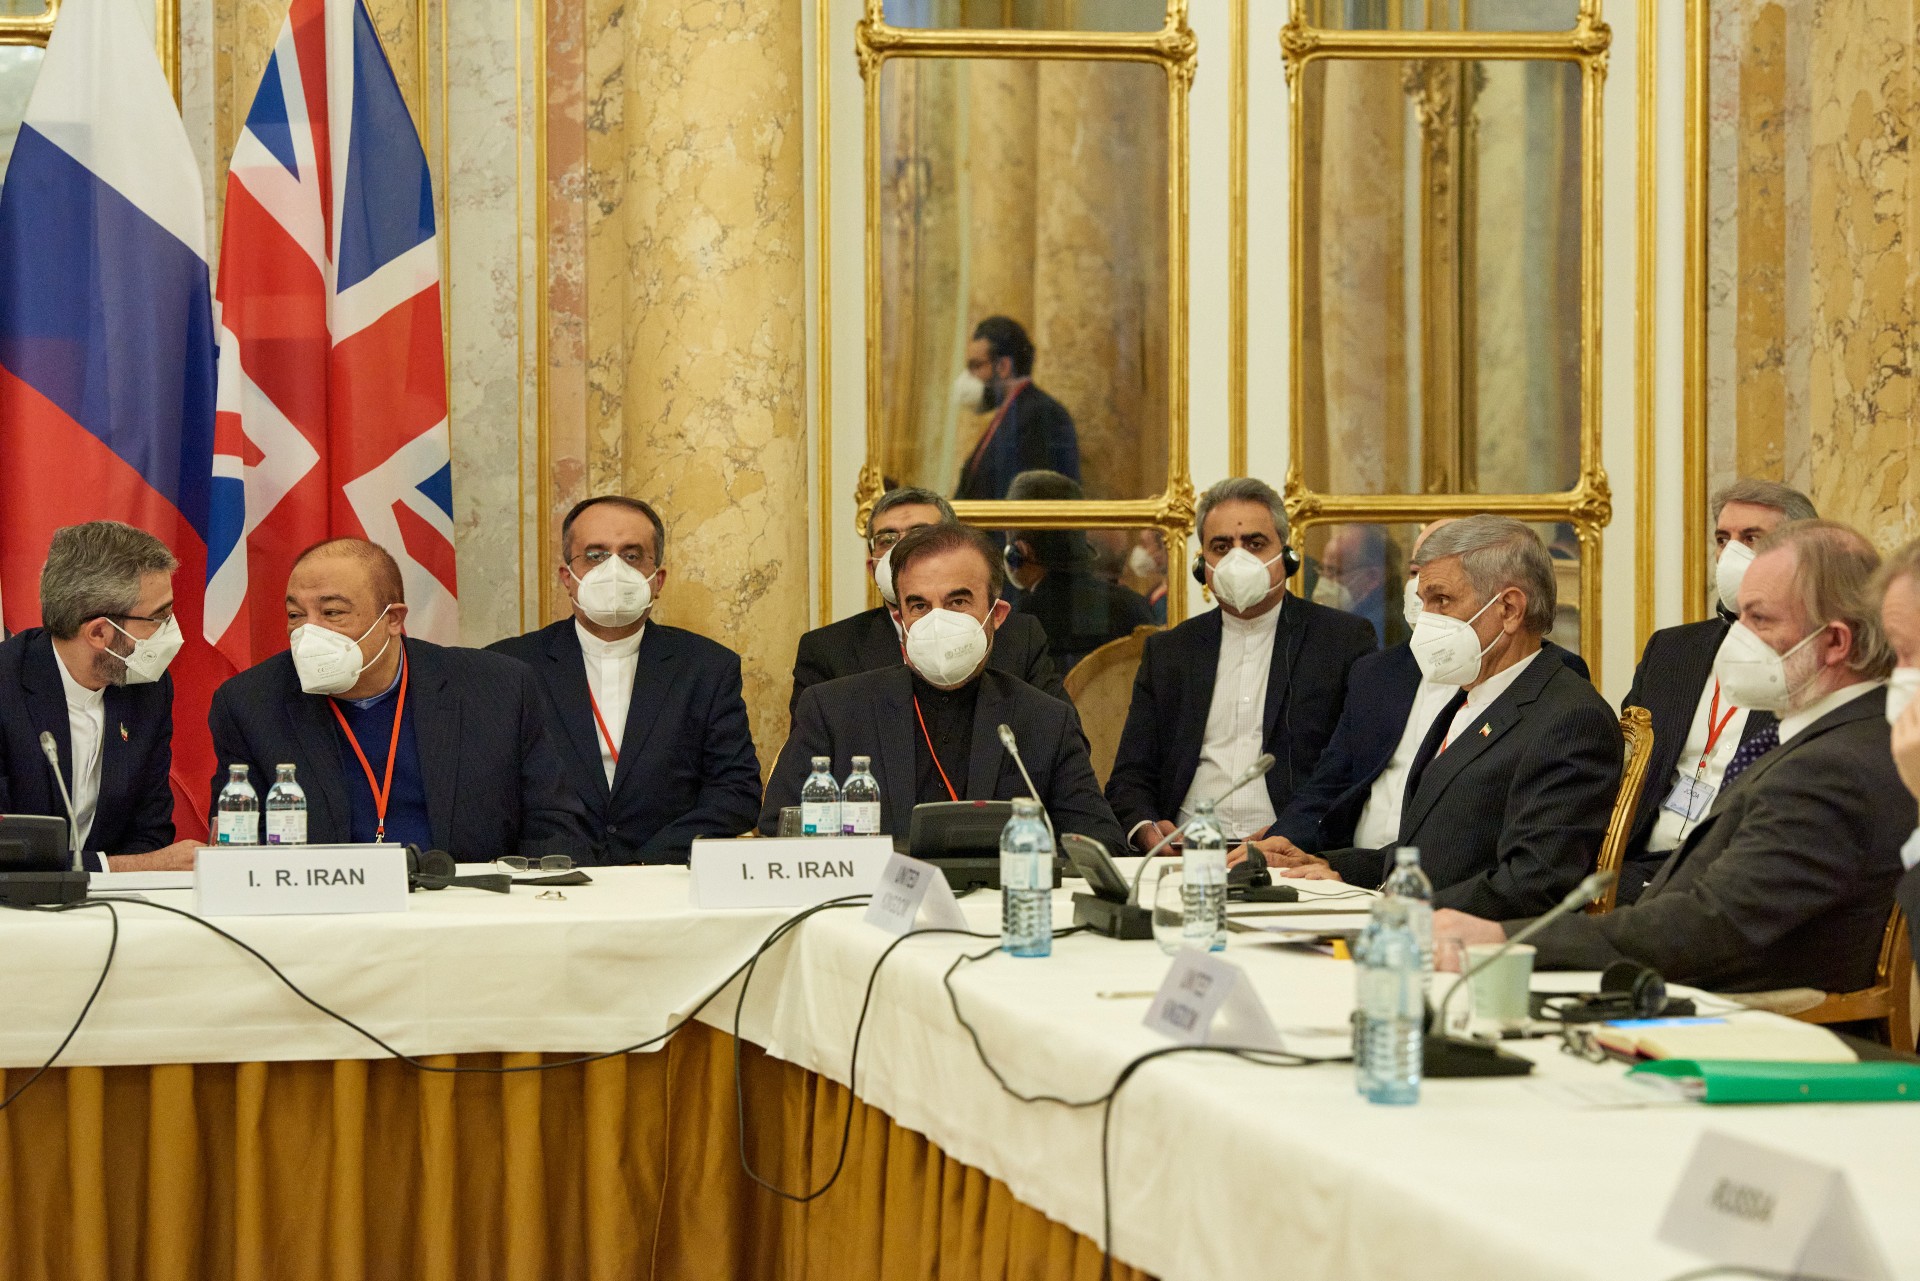 Iran's chief nuclear negotiator Ali Bagheri Kani and members of the Iranian delegation wait for the start of a meeting of the JCPOA Joint Commission in Vienna (Reuters)